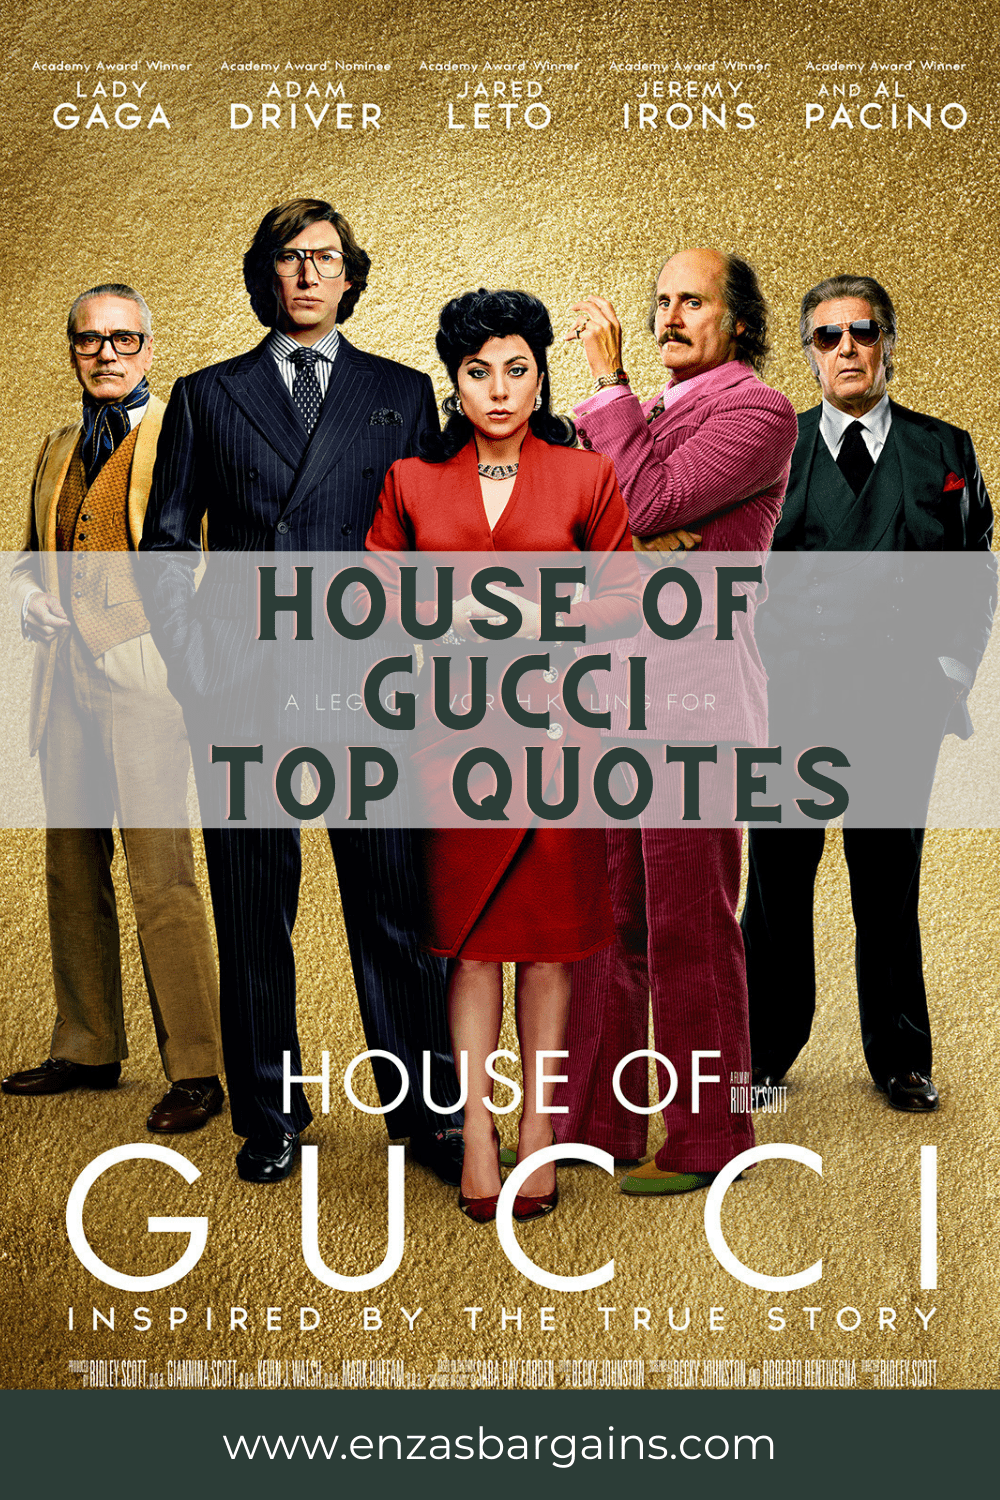 House of Gucci Quotes - Enza's Bargains